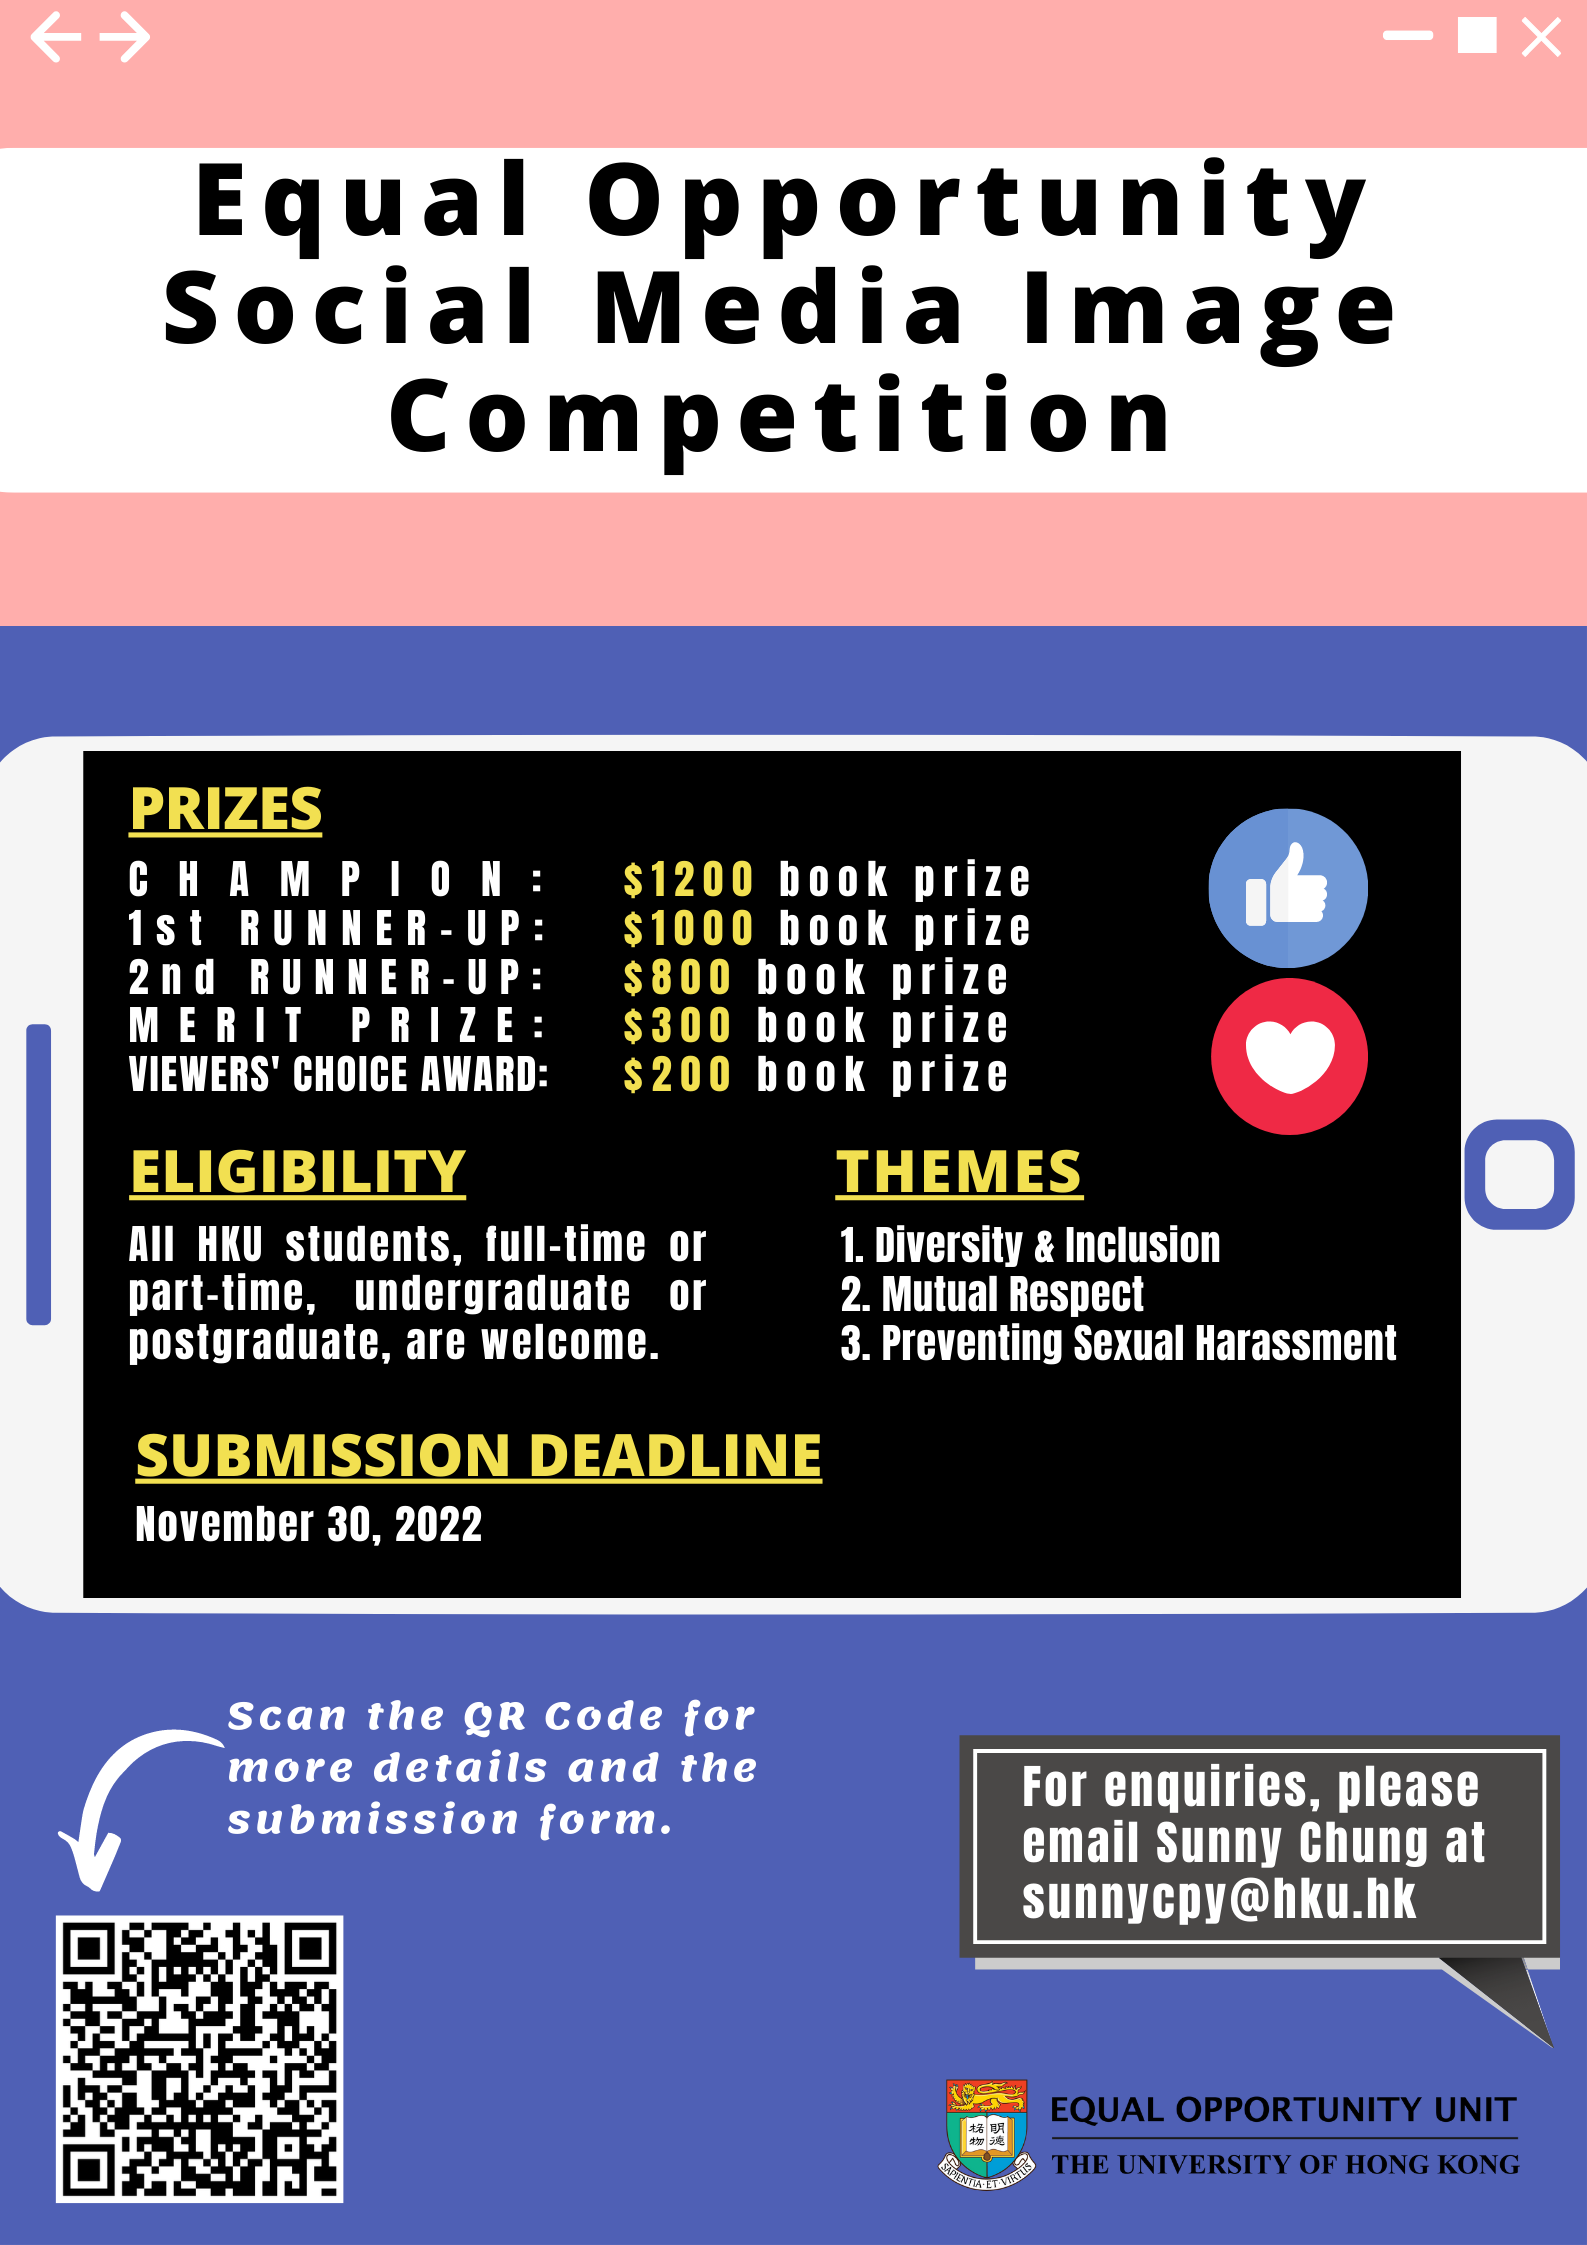 Equal Opportunity Social Media Image Competition Poster: Content same as text